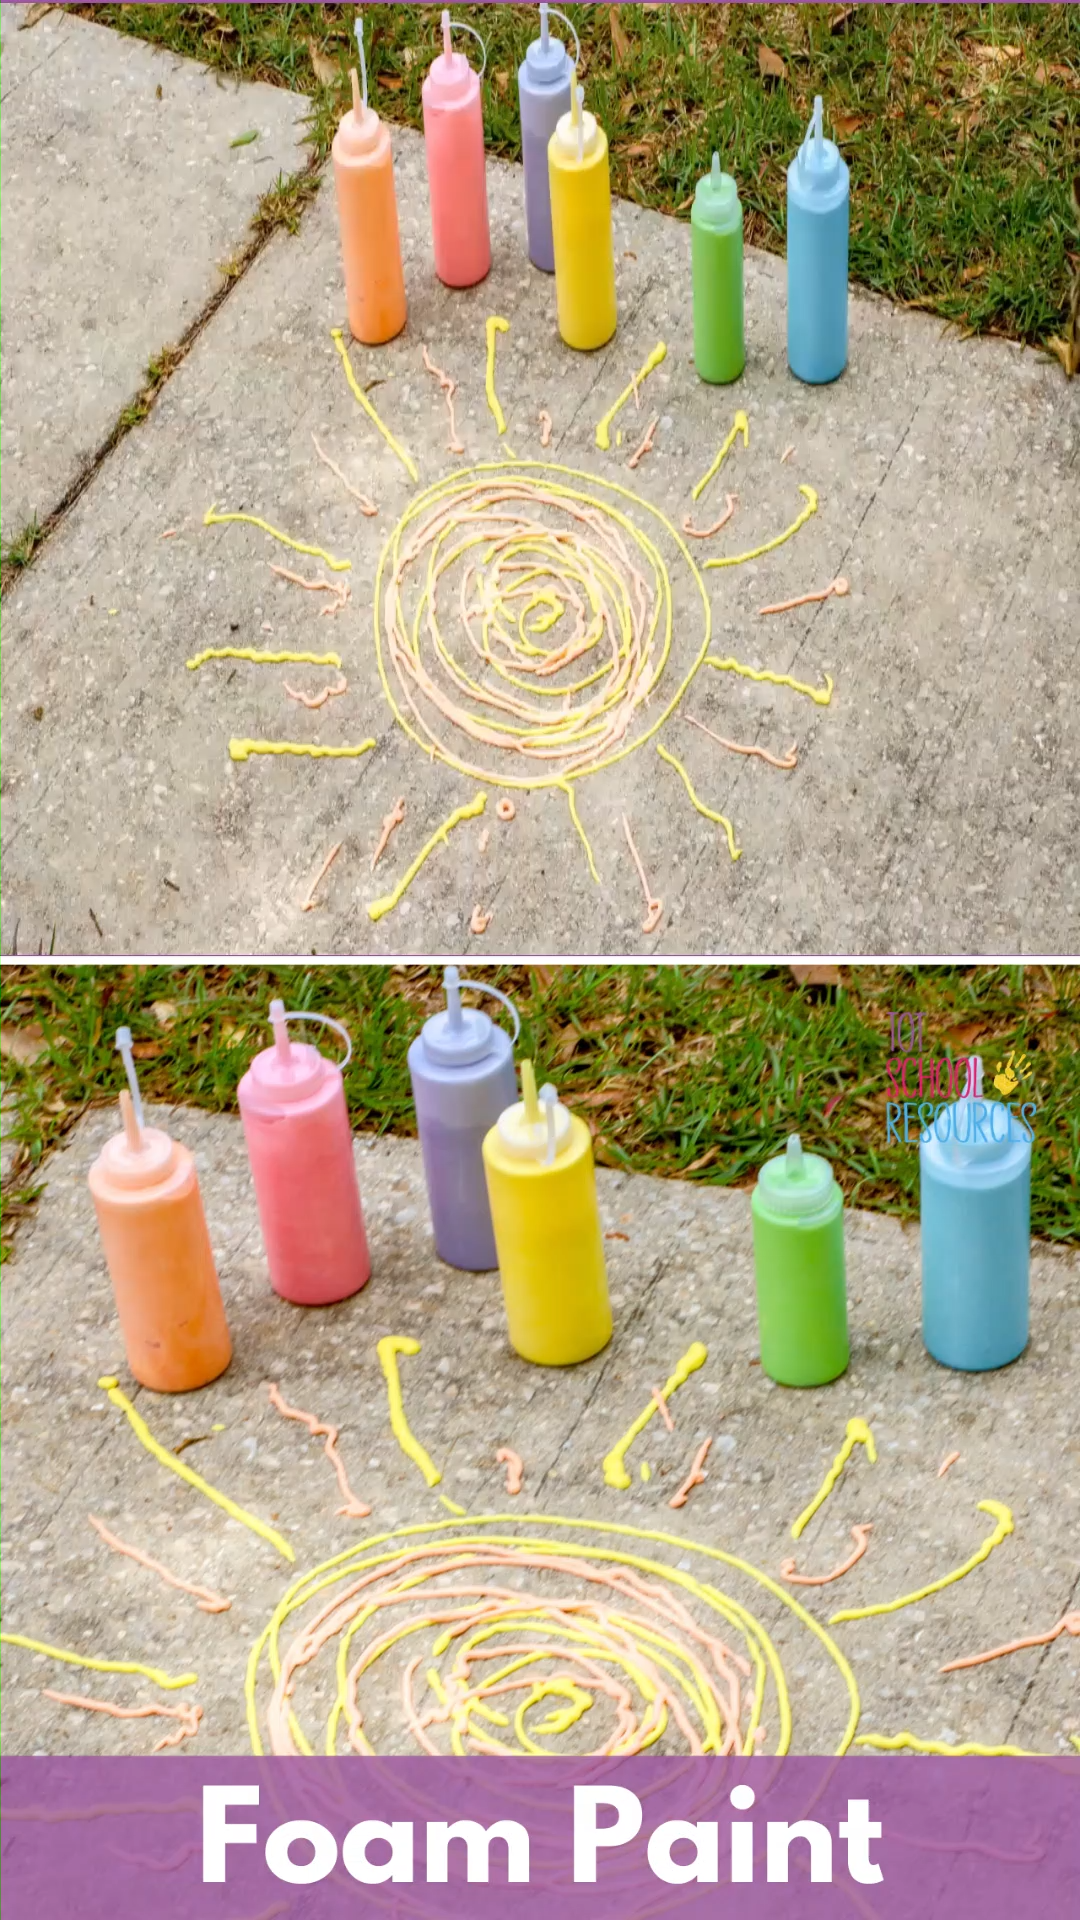 19 diy projects For Boys food coloring ideas